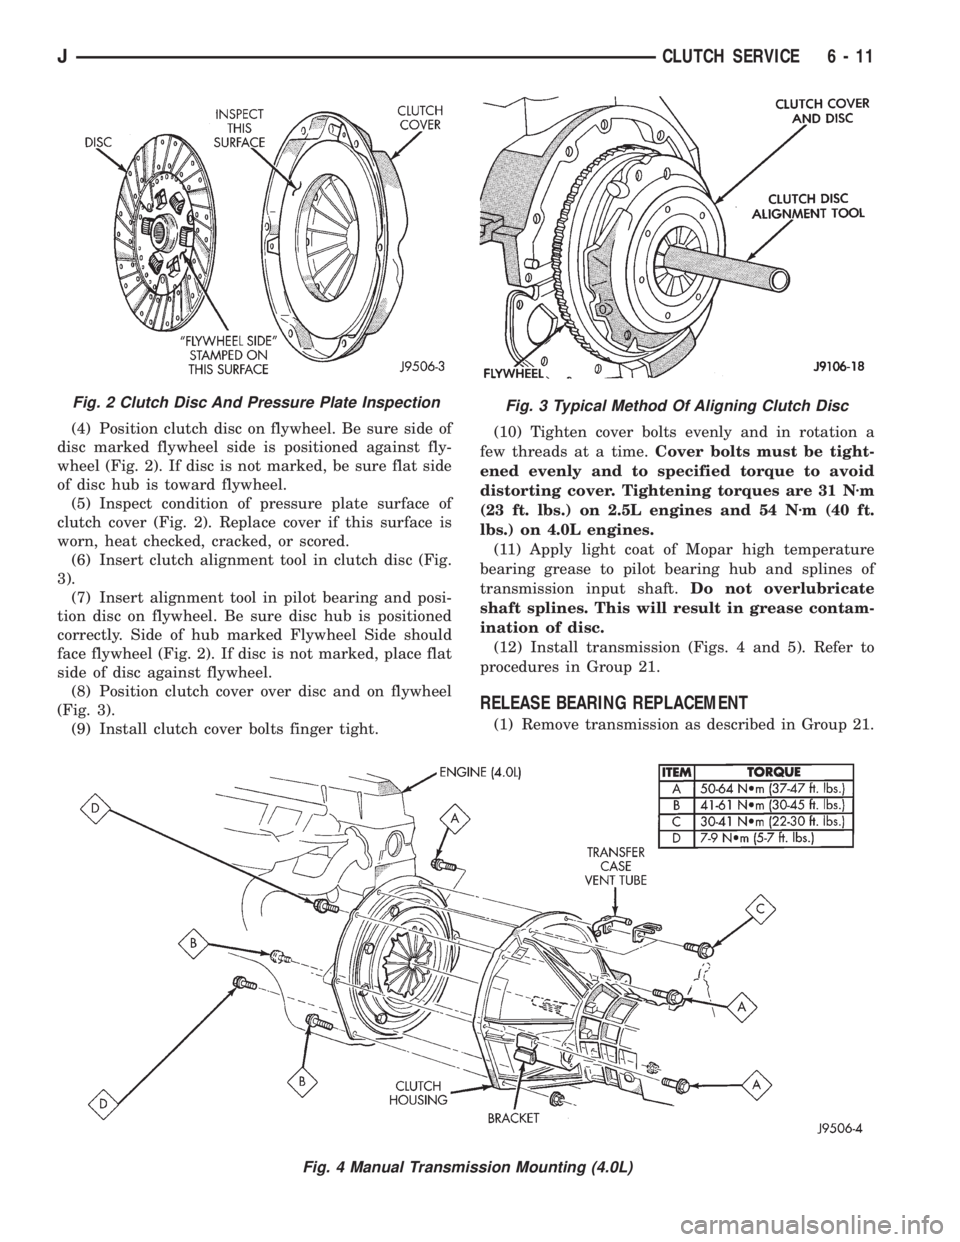 JEEP WRANGLER 1995  Owners Manual Fig. 3 Typical Method Of Aligning Clutch Disc
Fig. 4 Manual Transmission Mounting (4.0L)
JCLUTCH SERVICE 6 - 11 